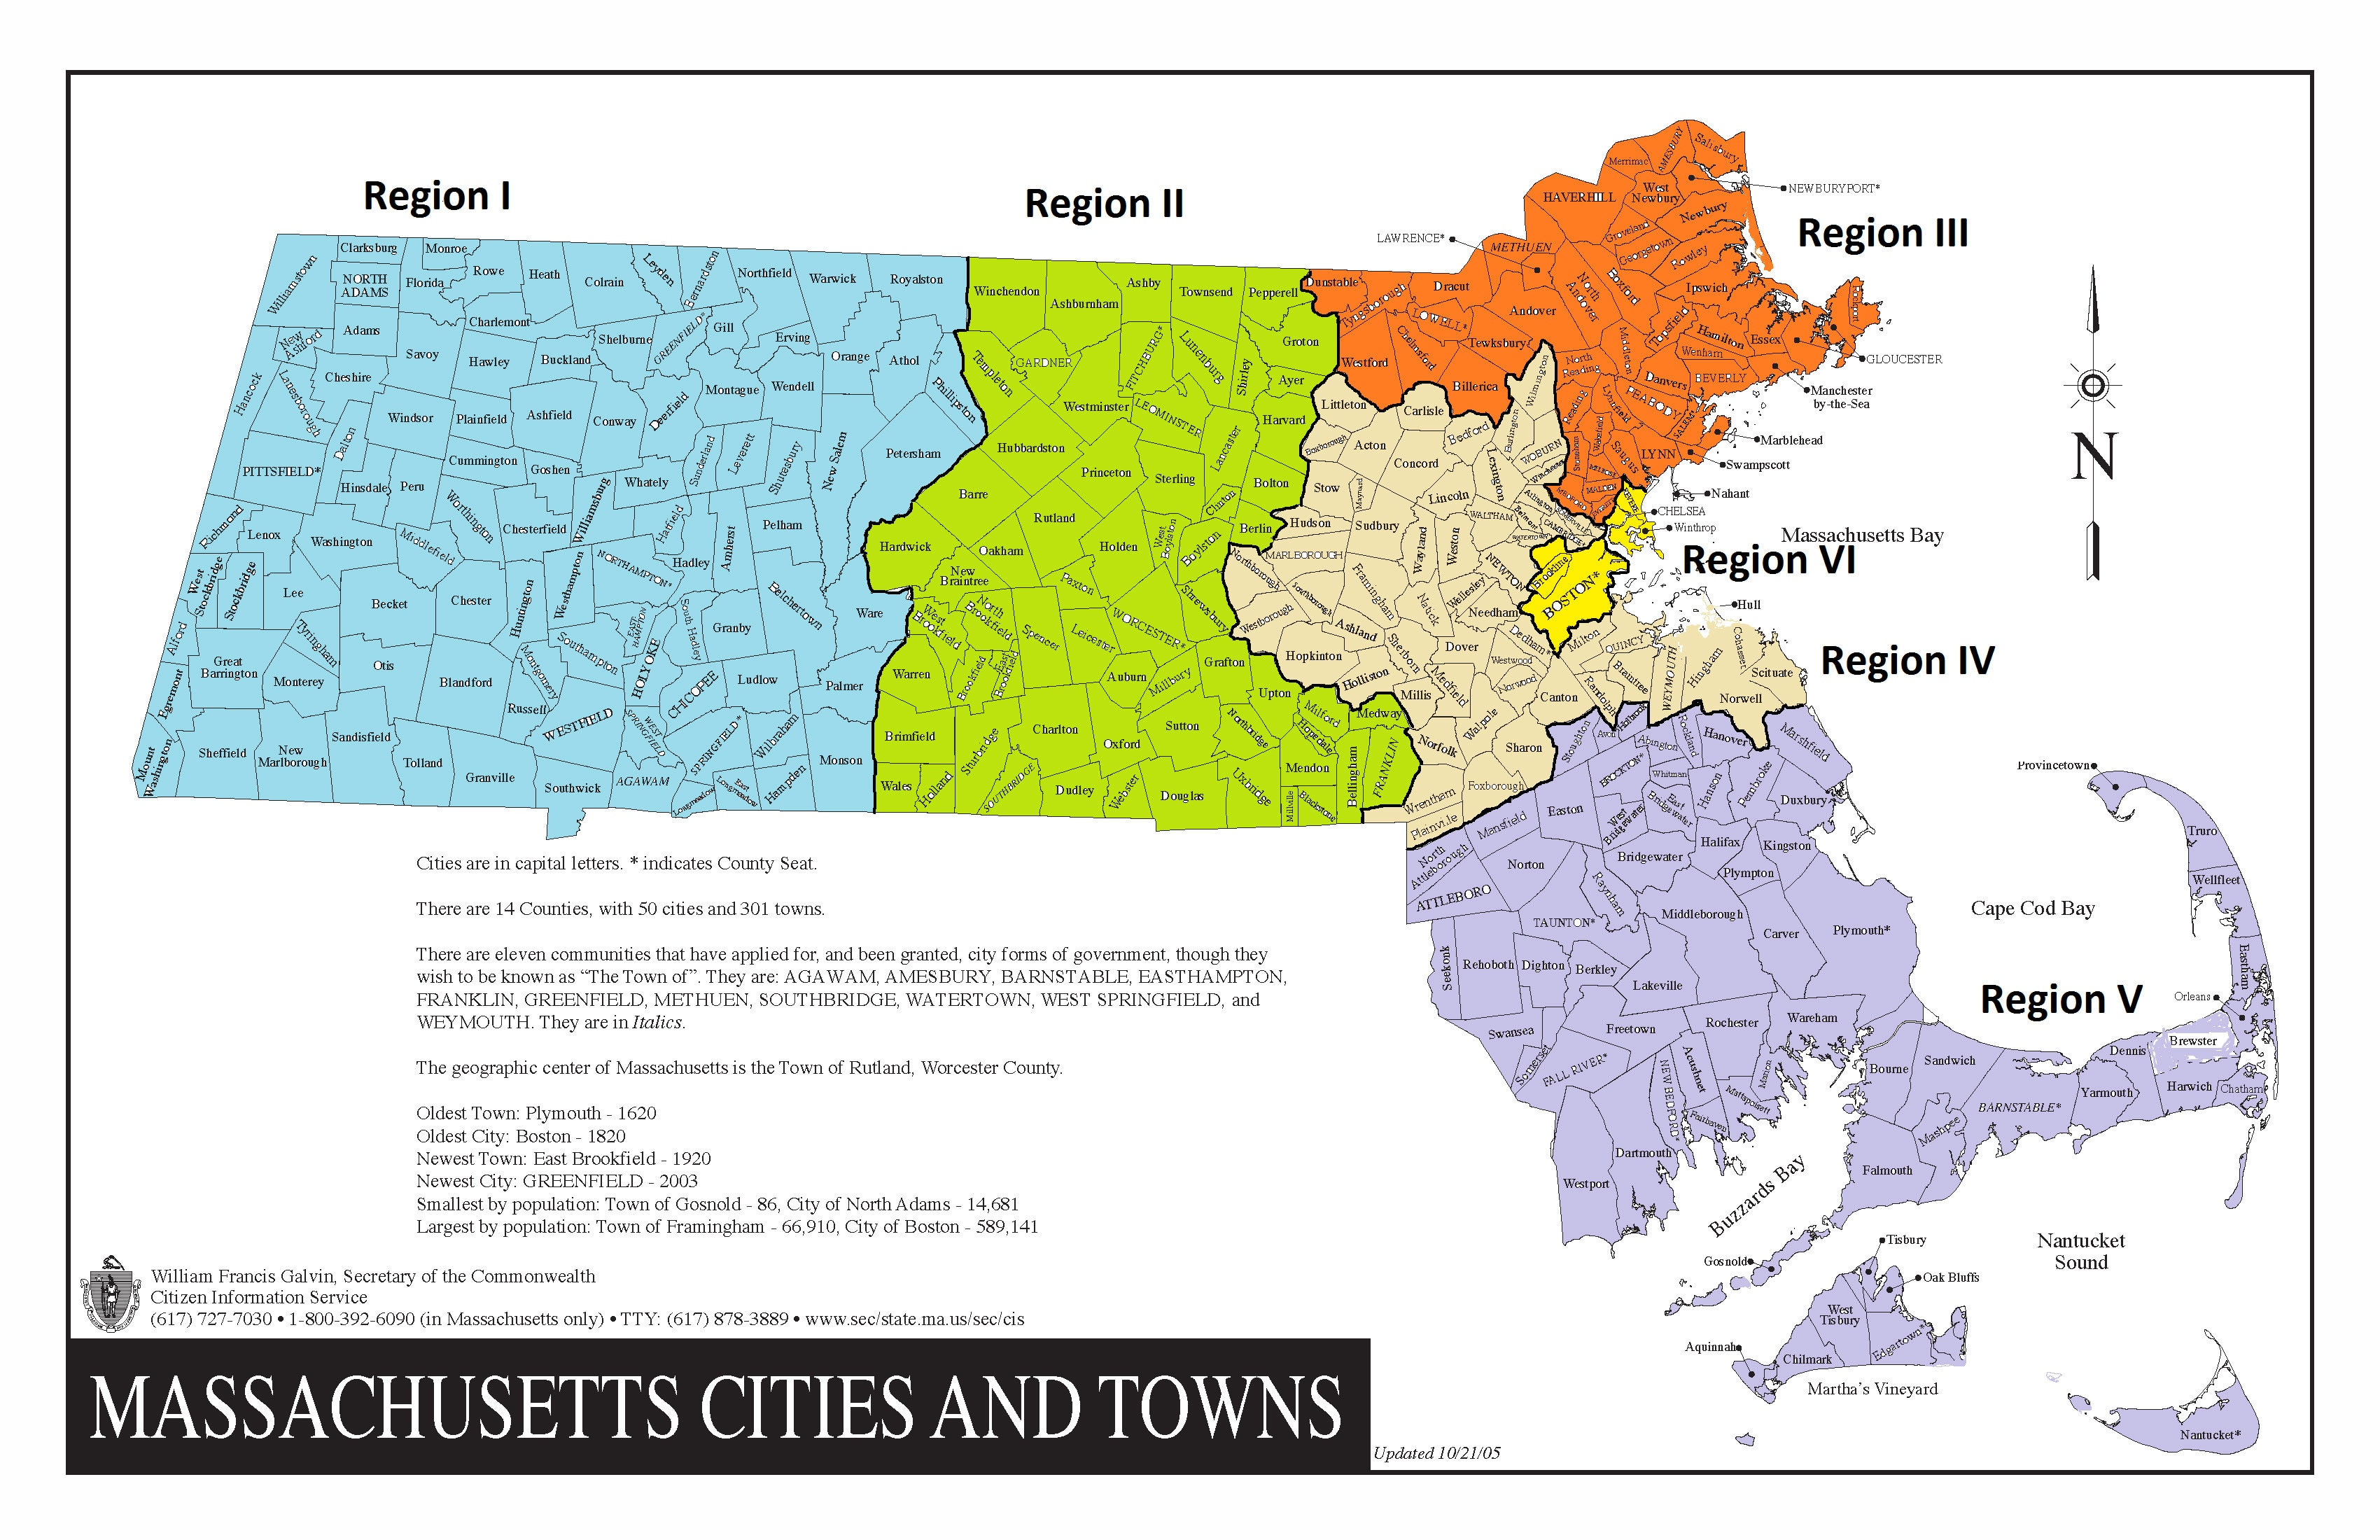 A color-coded map of Massachusetts depicting the six MCB regions. Region 1 is Western Massachusetts. Region 2 is Central Massachusetts. Region 3 is Northeast Massachusetts. Region 4 is MetroWest. Region 5 is Southeatern Massachusetts, Cape Cod, and the Islands. Region 6 is Greater Boston.